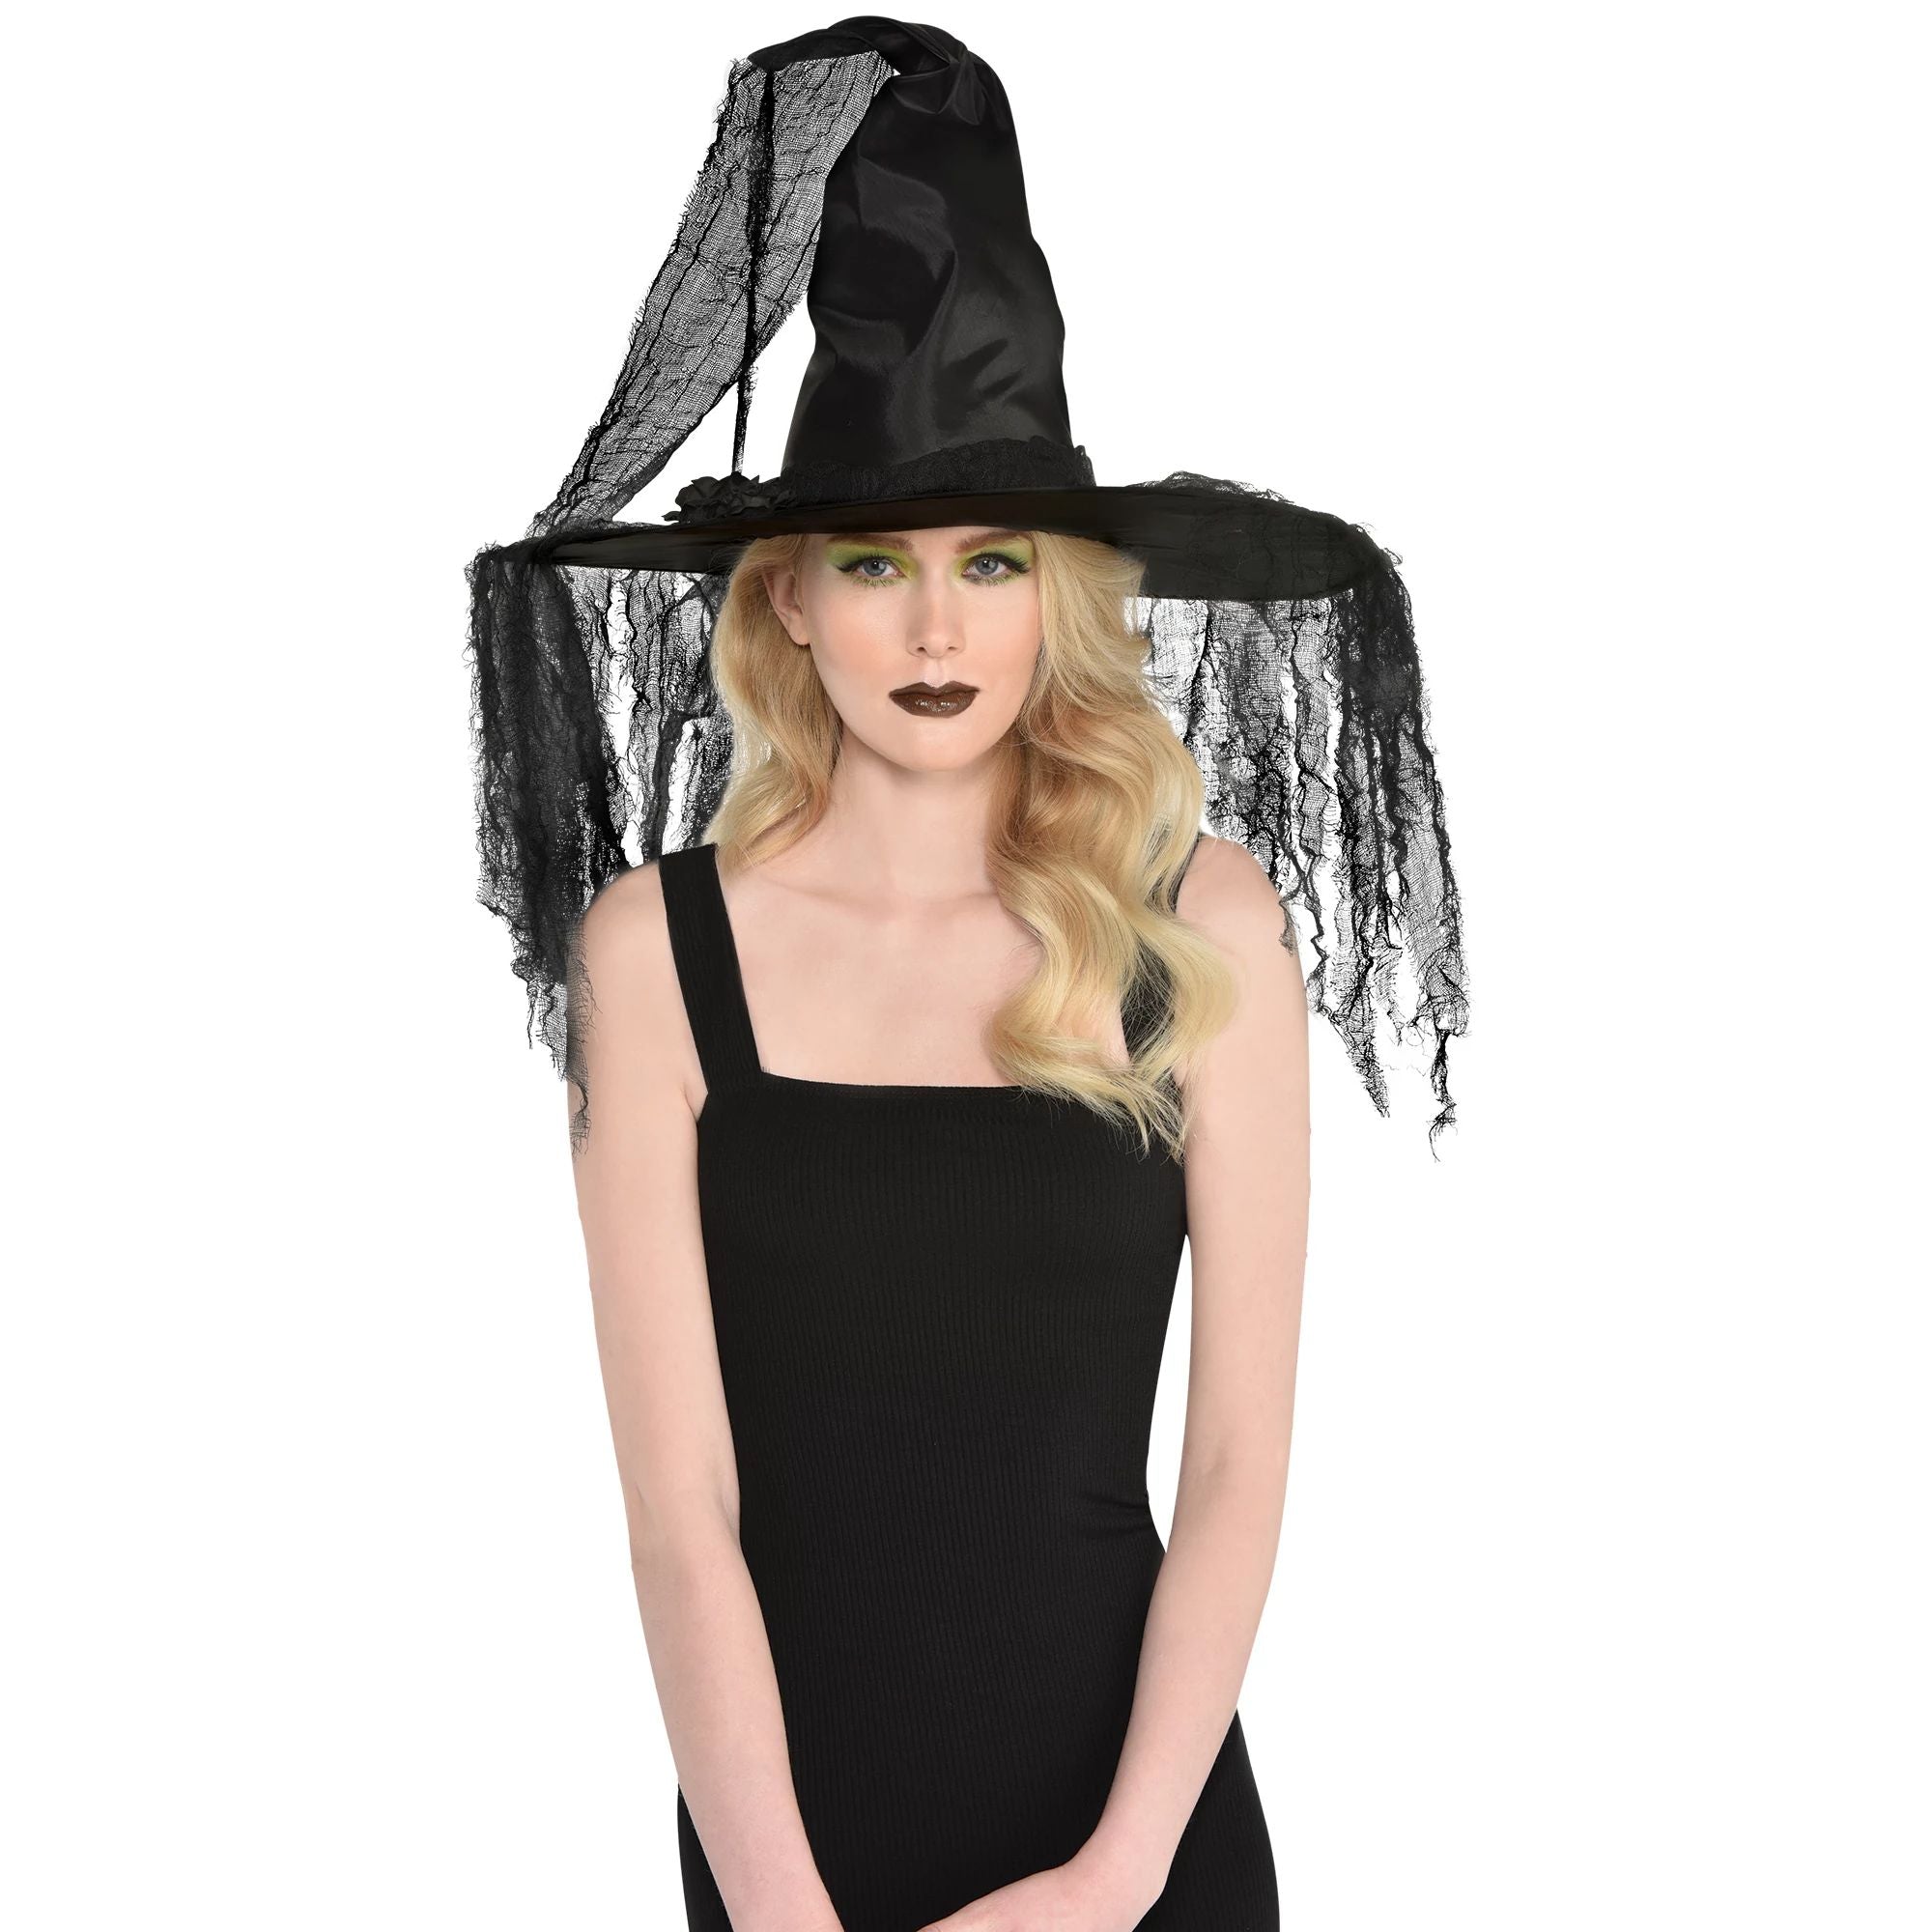 Amscan COSTUMES: HATS Haunted Deluxe Witch Hat